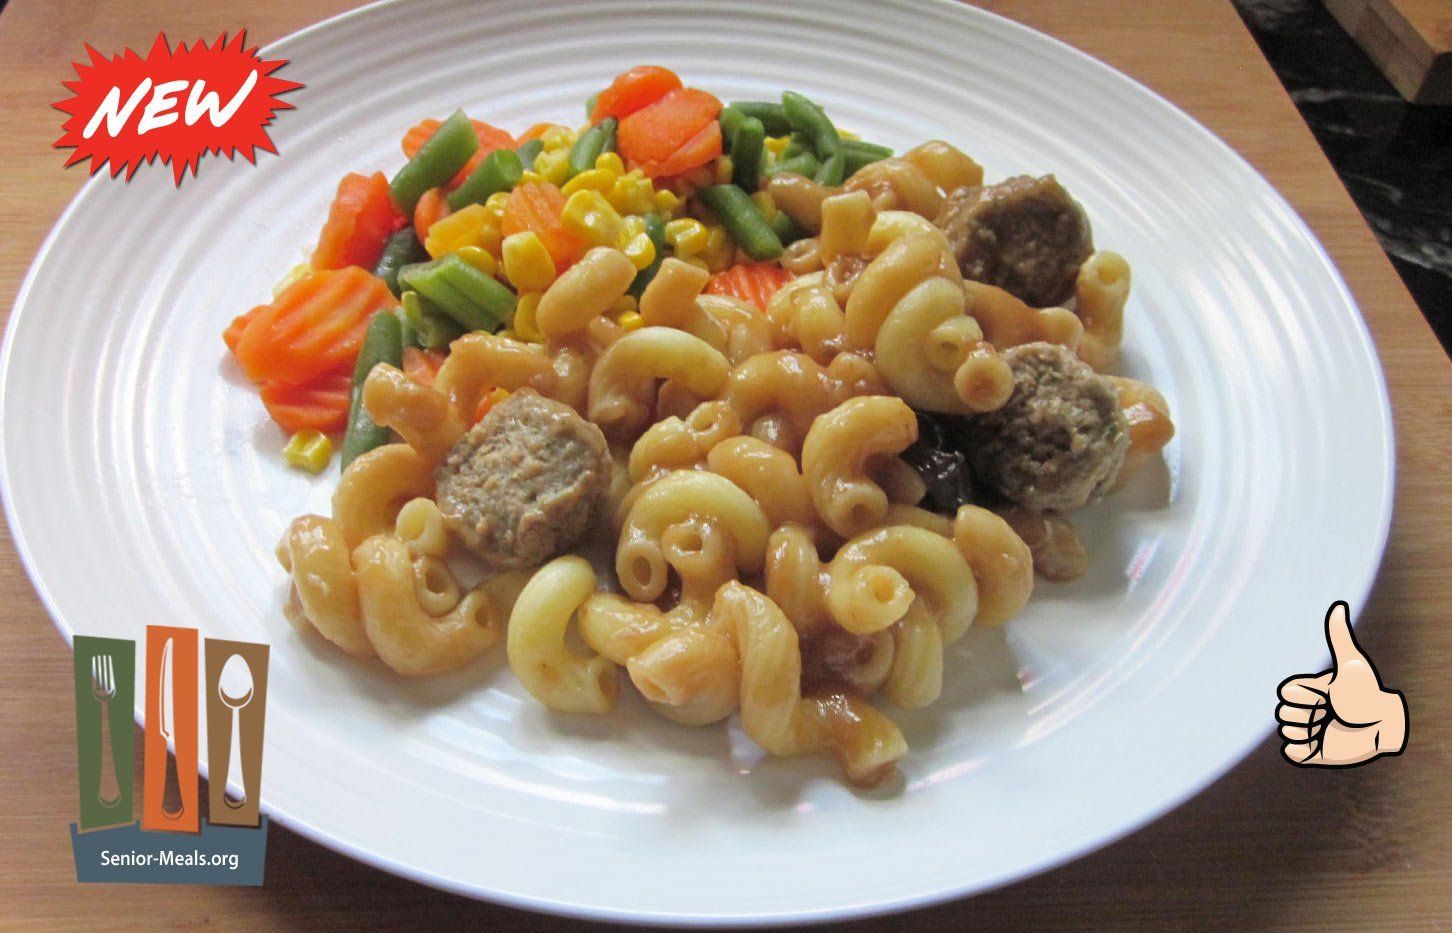 Beef Meatballs with Mushroom Gravy - The Al Dente Pasta is the Star of the Show